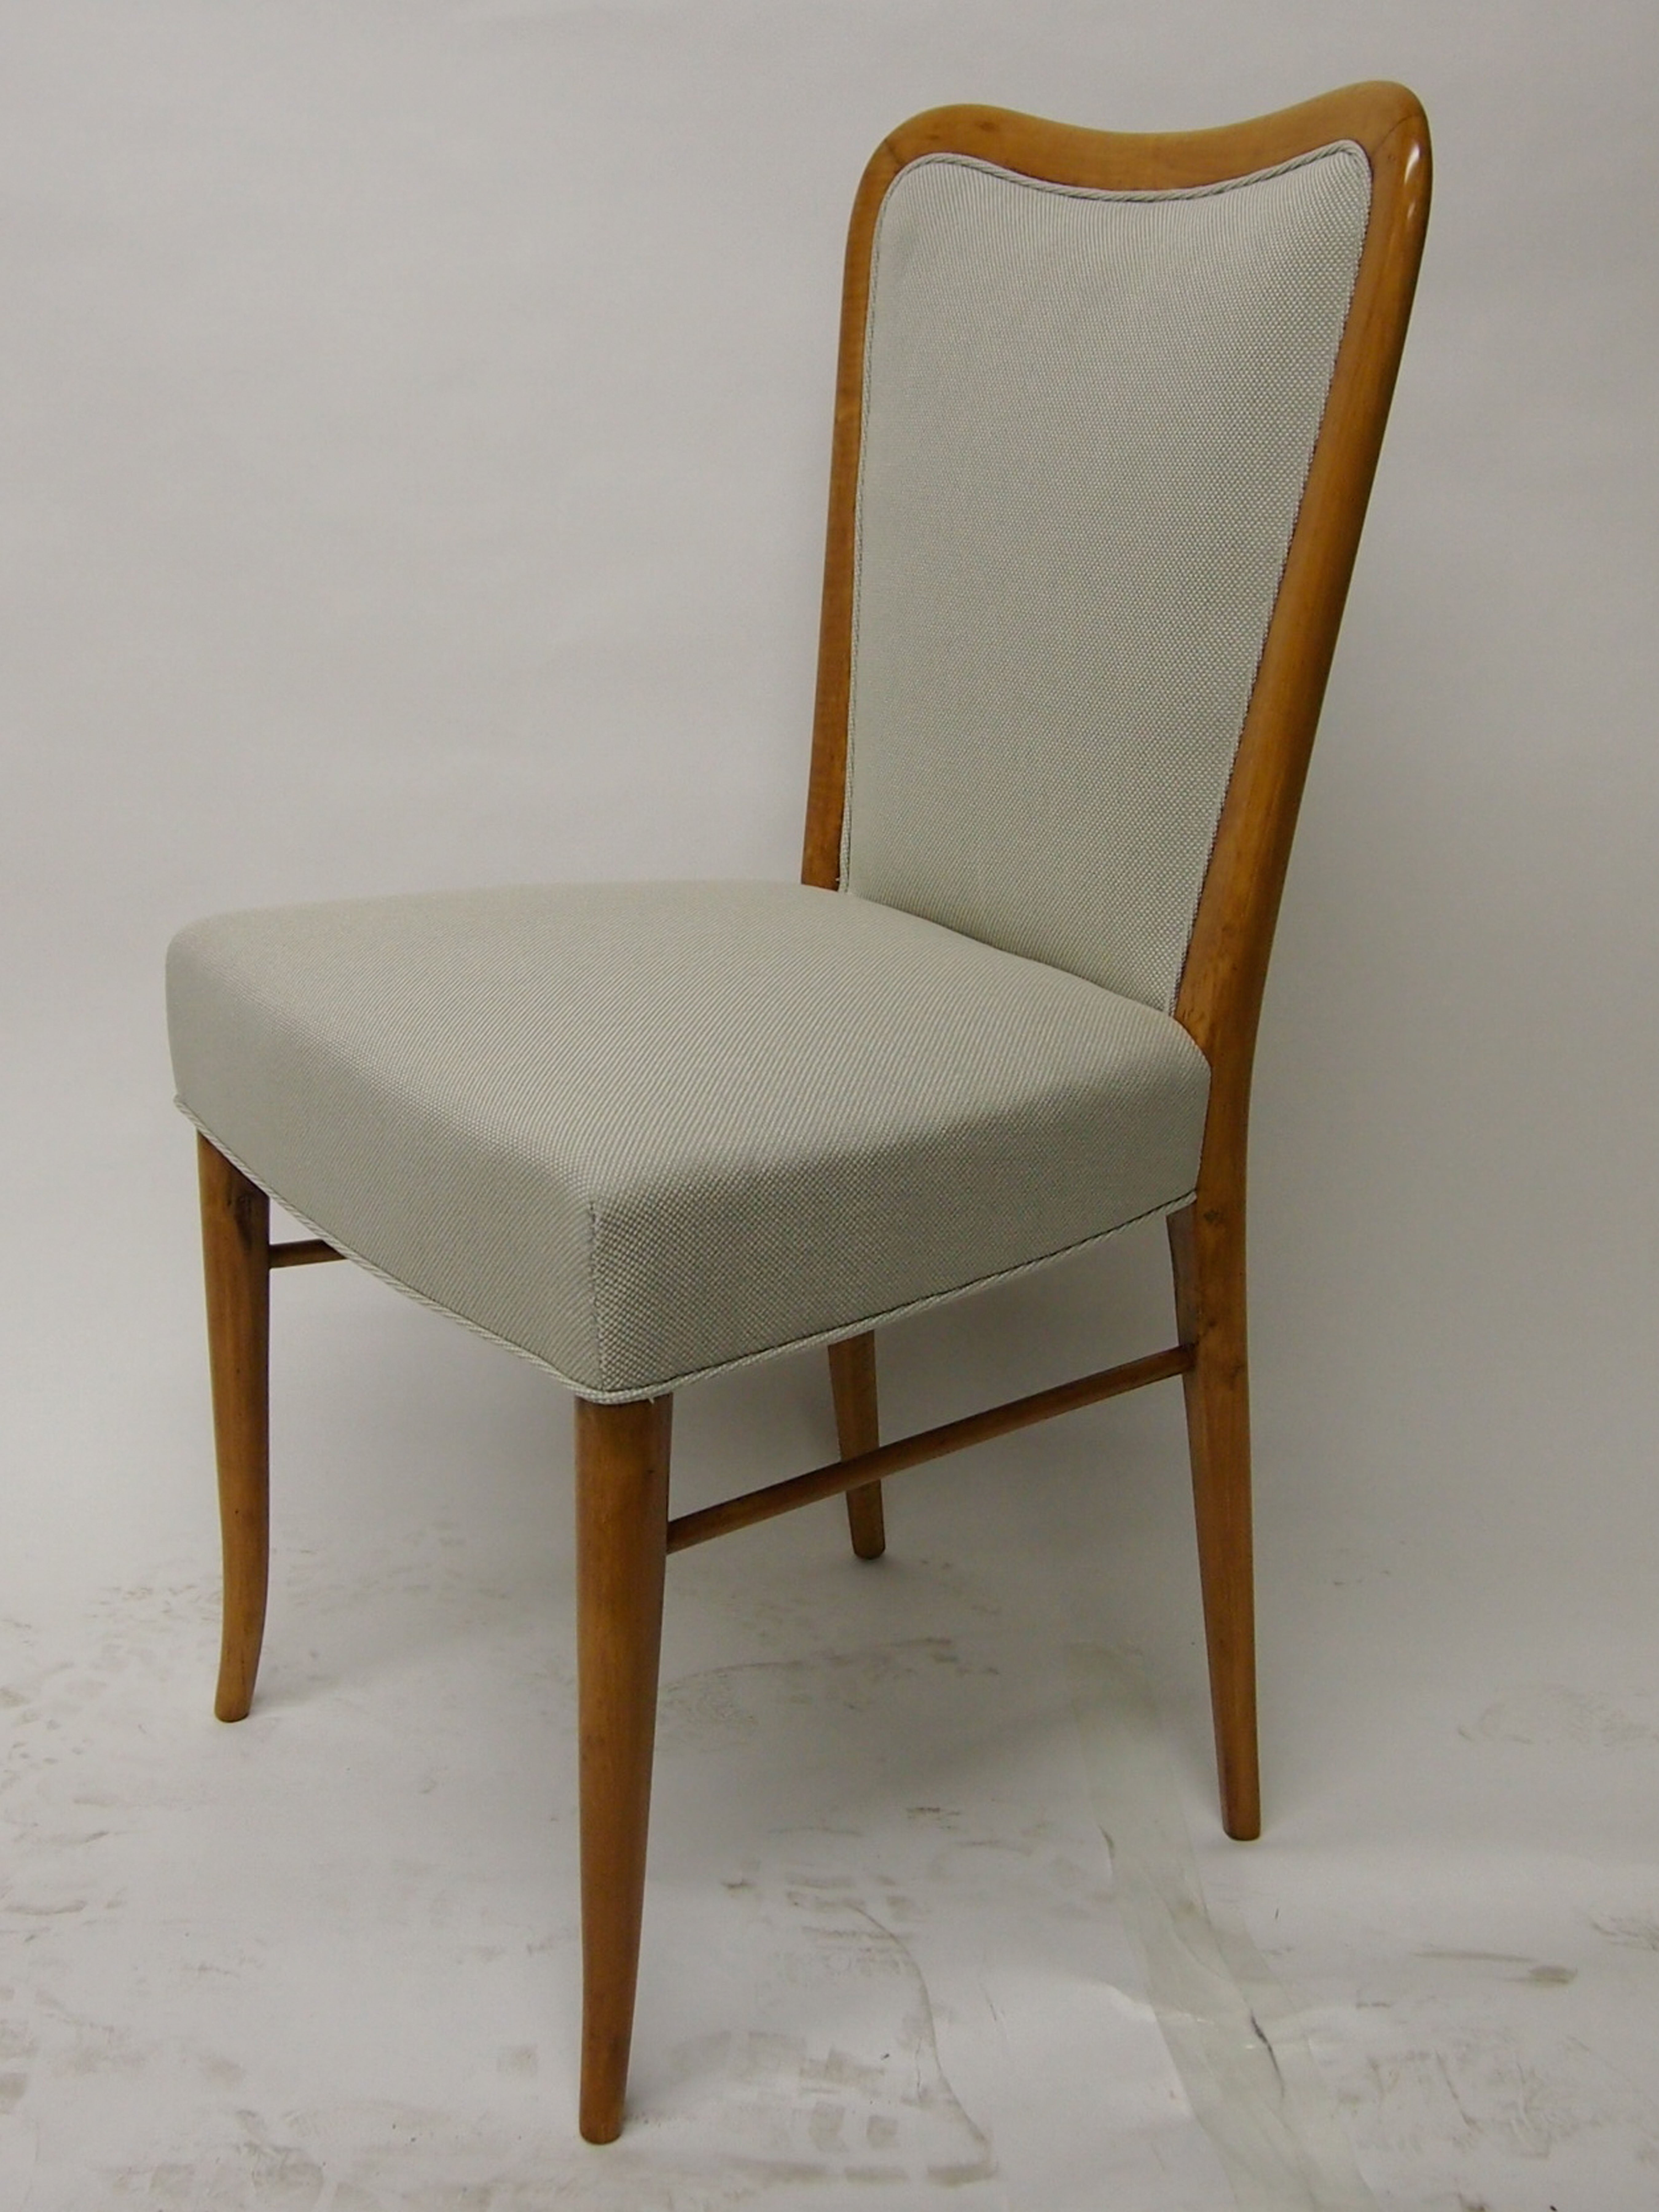 Desk Chair by Jean Royere Manufactured in France in the 1950's